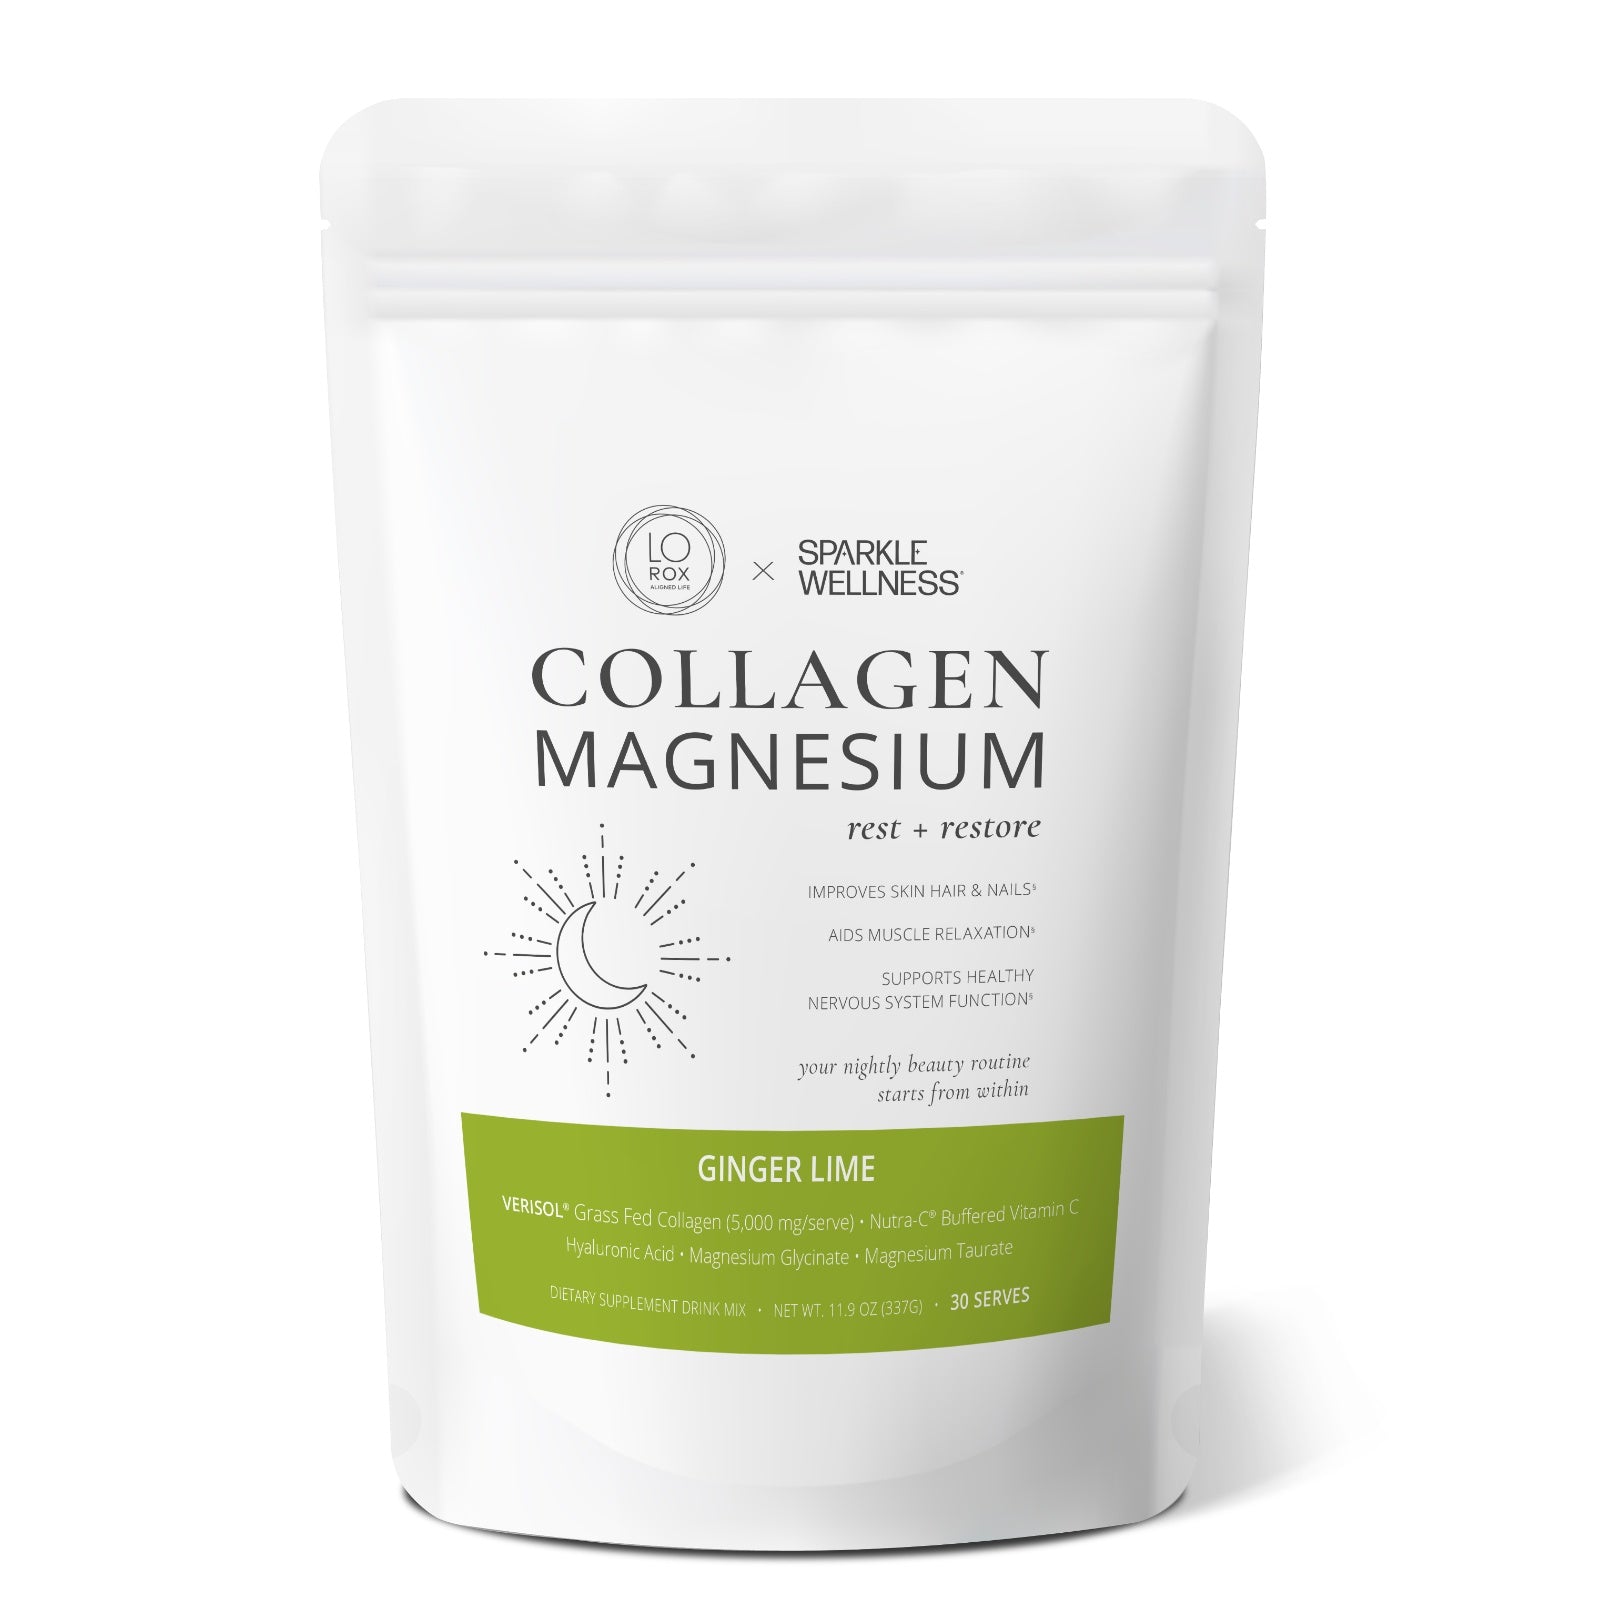 Collagen Magnesium Ginger Lime, 44336898998490